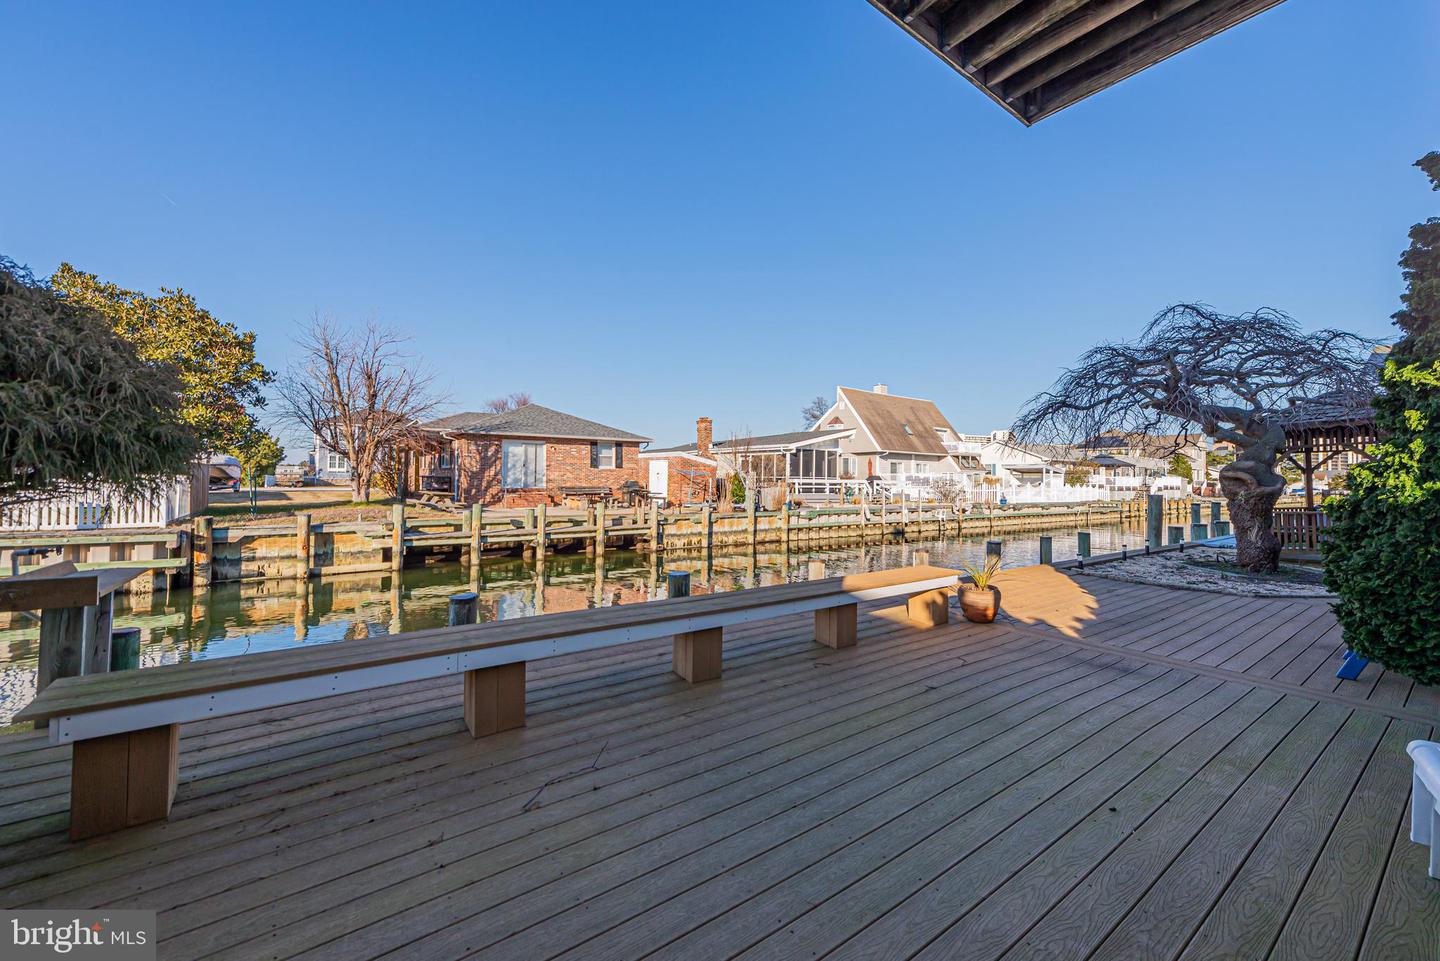 MDWO2019074-802877622656-2024-02-25-13-51-28 154 Old Wharf Rd | Ocean City, MD Real Estate For Sale | MLS# Mdwo2019074  - 1st Choice Properties